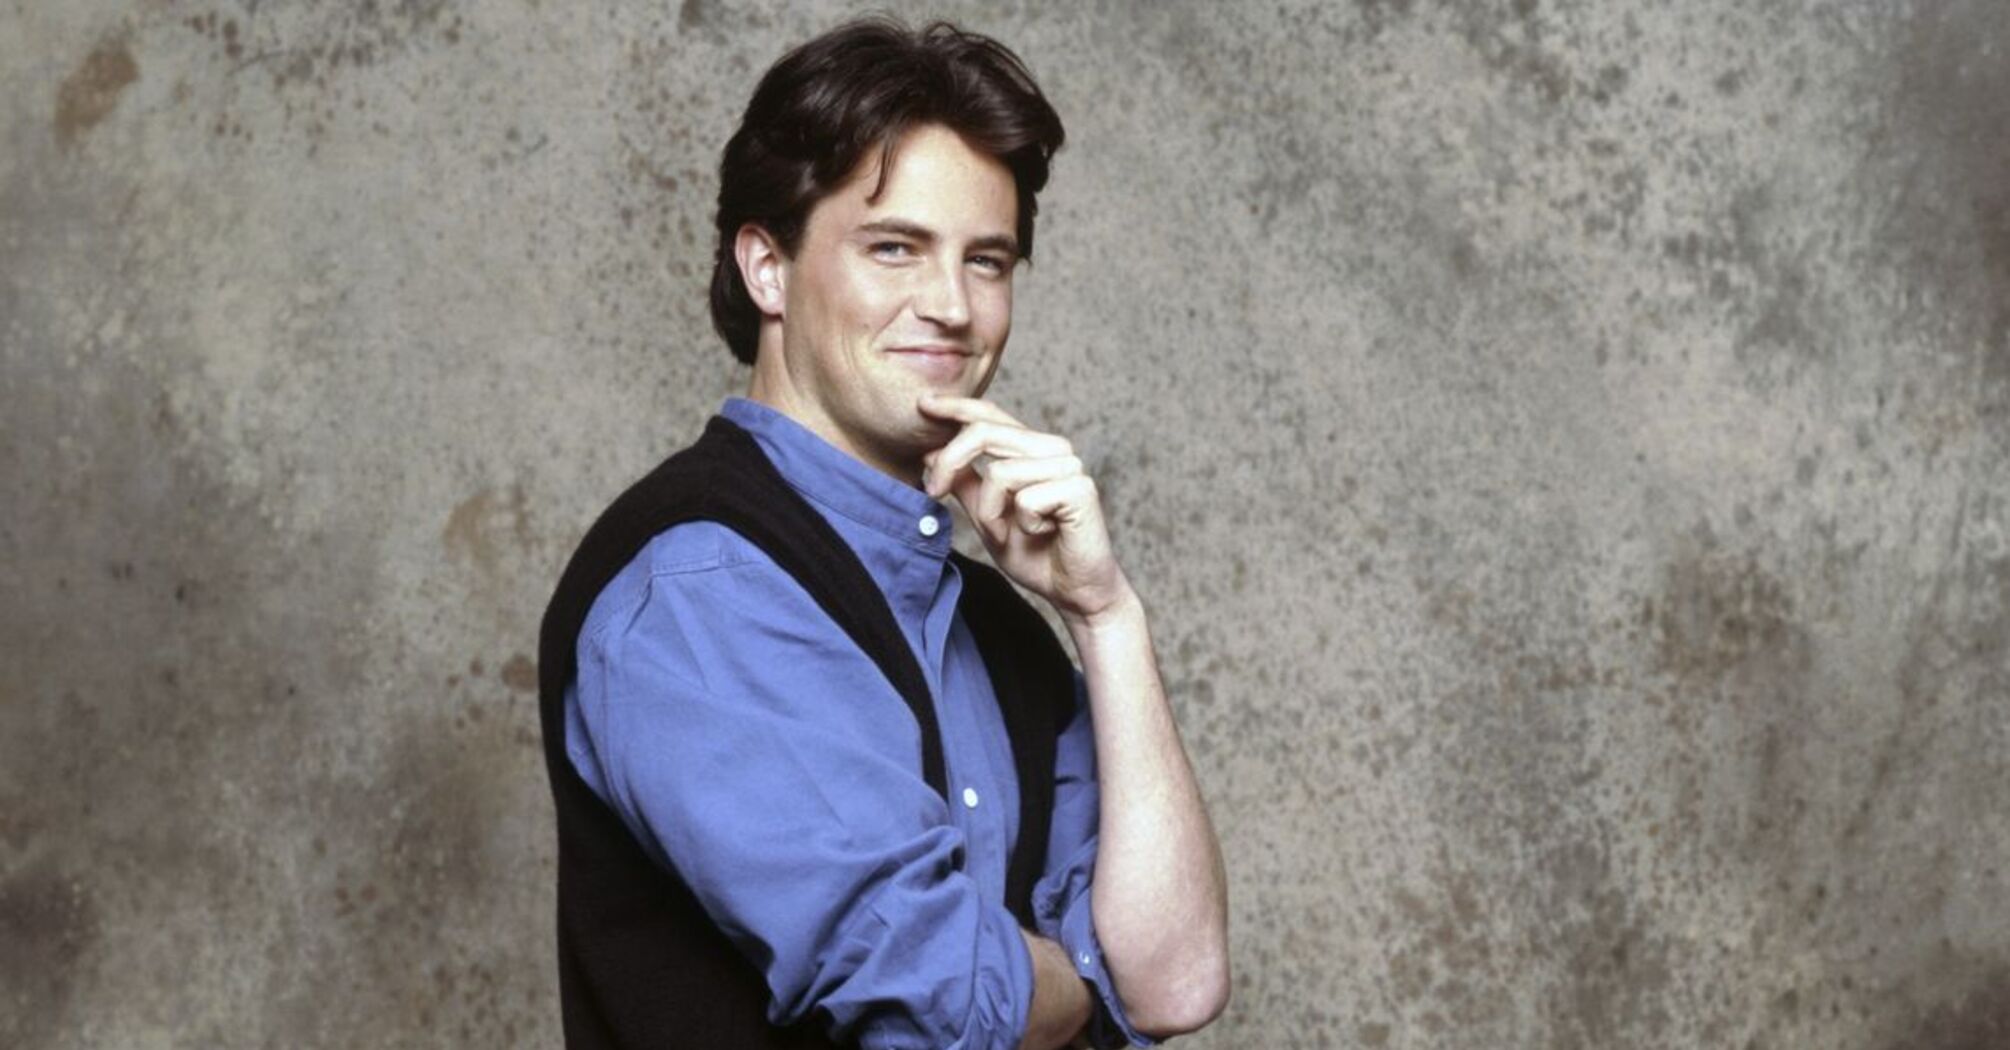 5 interesting facts about Matthew Perry: he true king of sarcasm